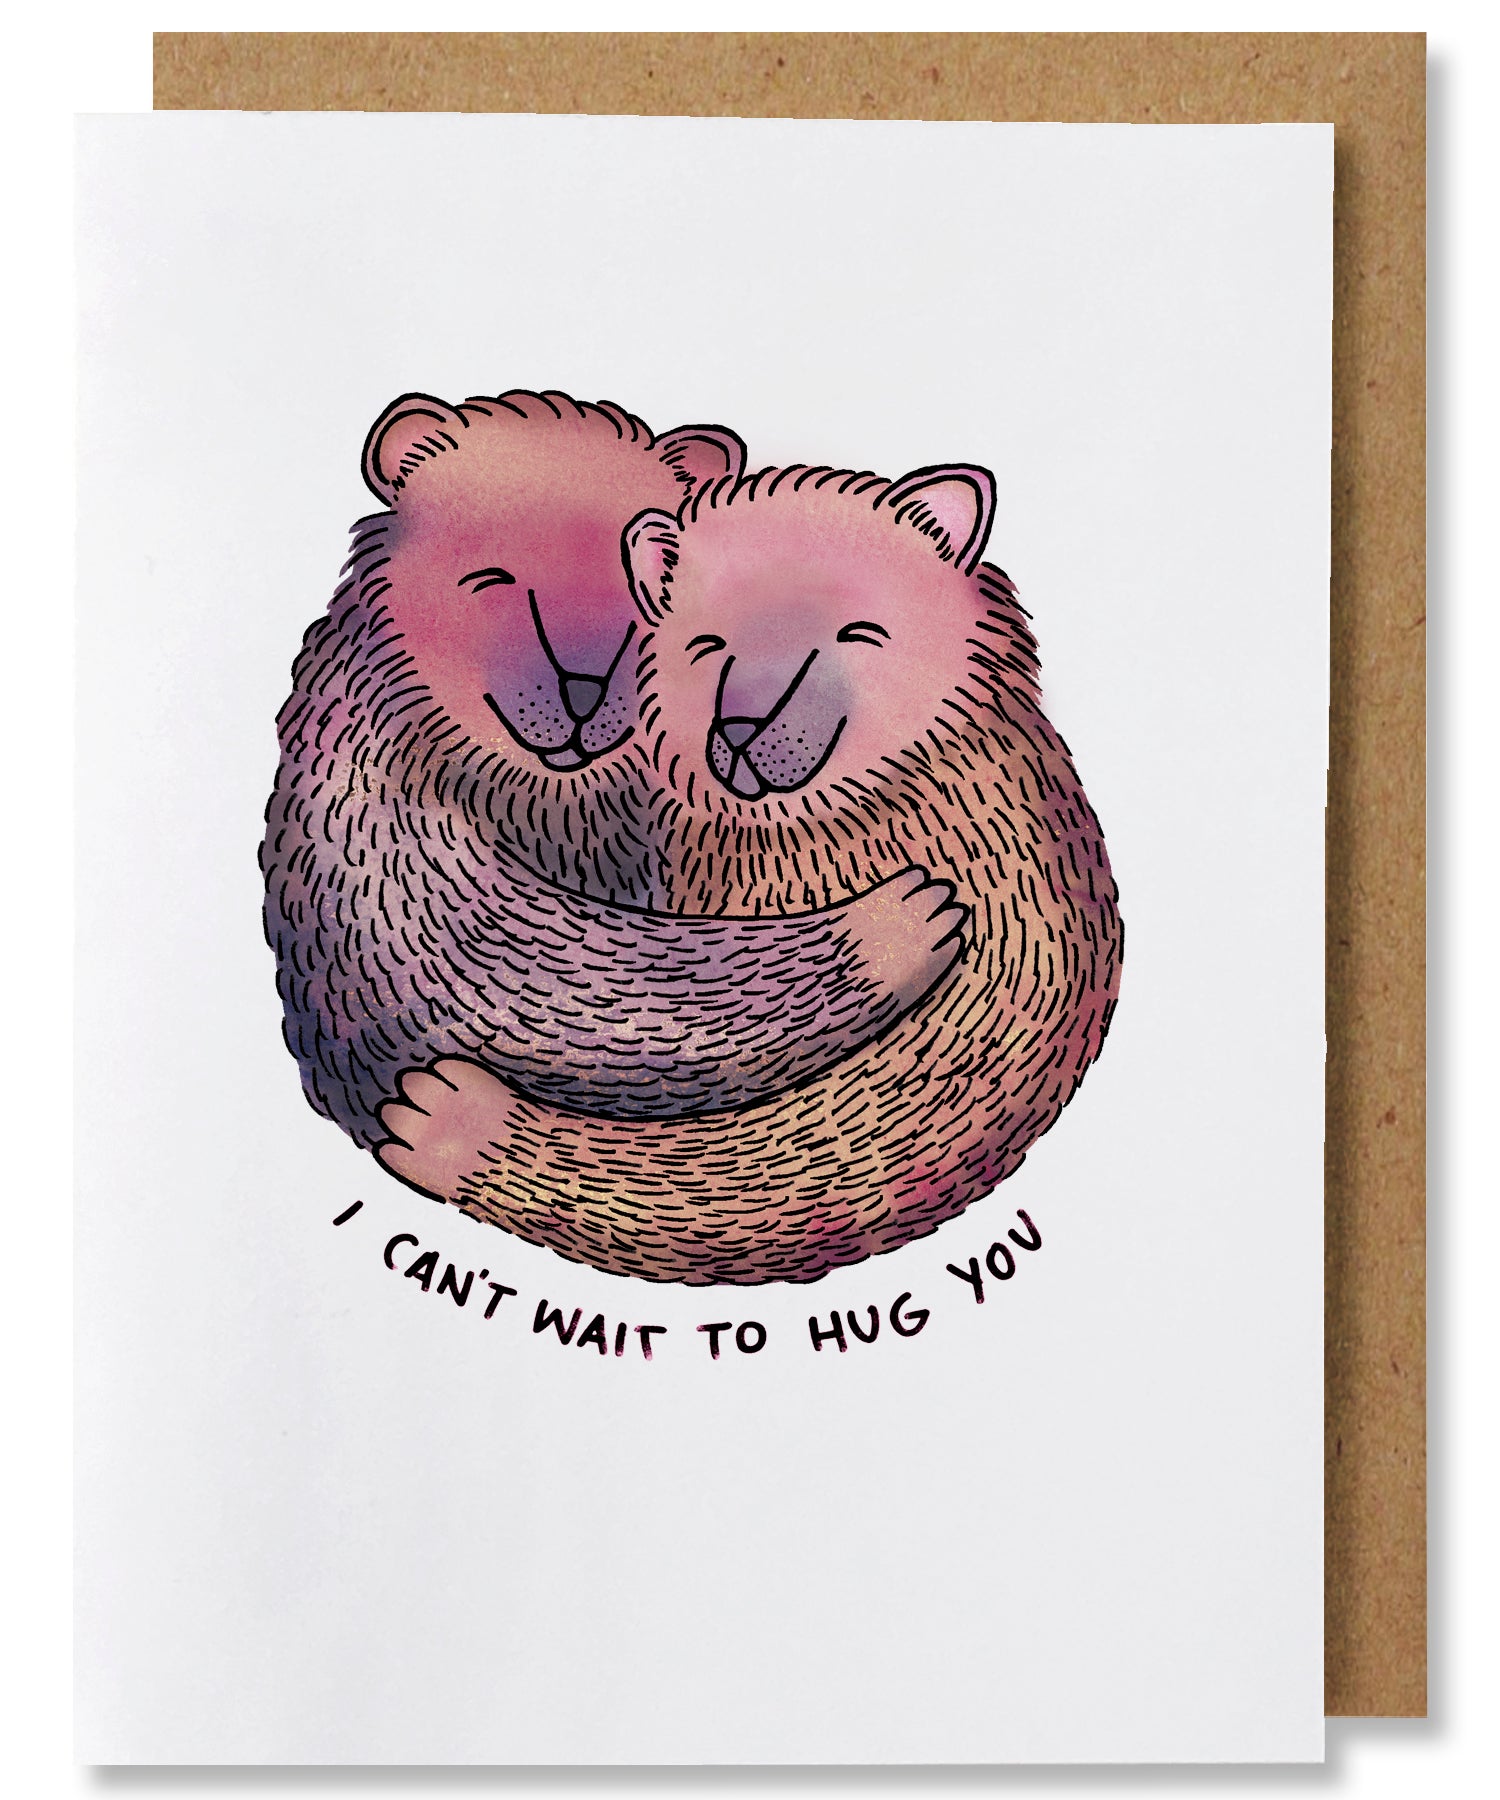 This greeting card features two embracing bears that are colored in shades of brown, pinks, yellows, and purples. The bears' bodies are shown from the waist up and from front view, their heads nestled close to each other and overall they are creating a circular shape.  The words "I can't wait to hug you" follow their bottom curve. The background is white. The card is paired with a brown kraft envelope.